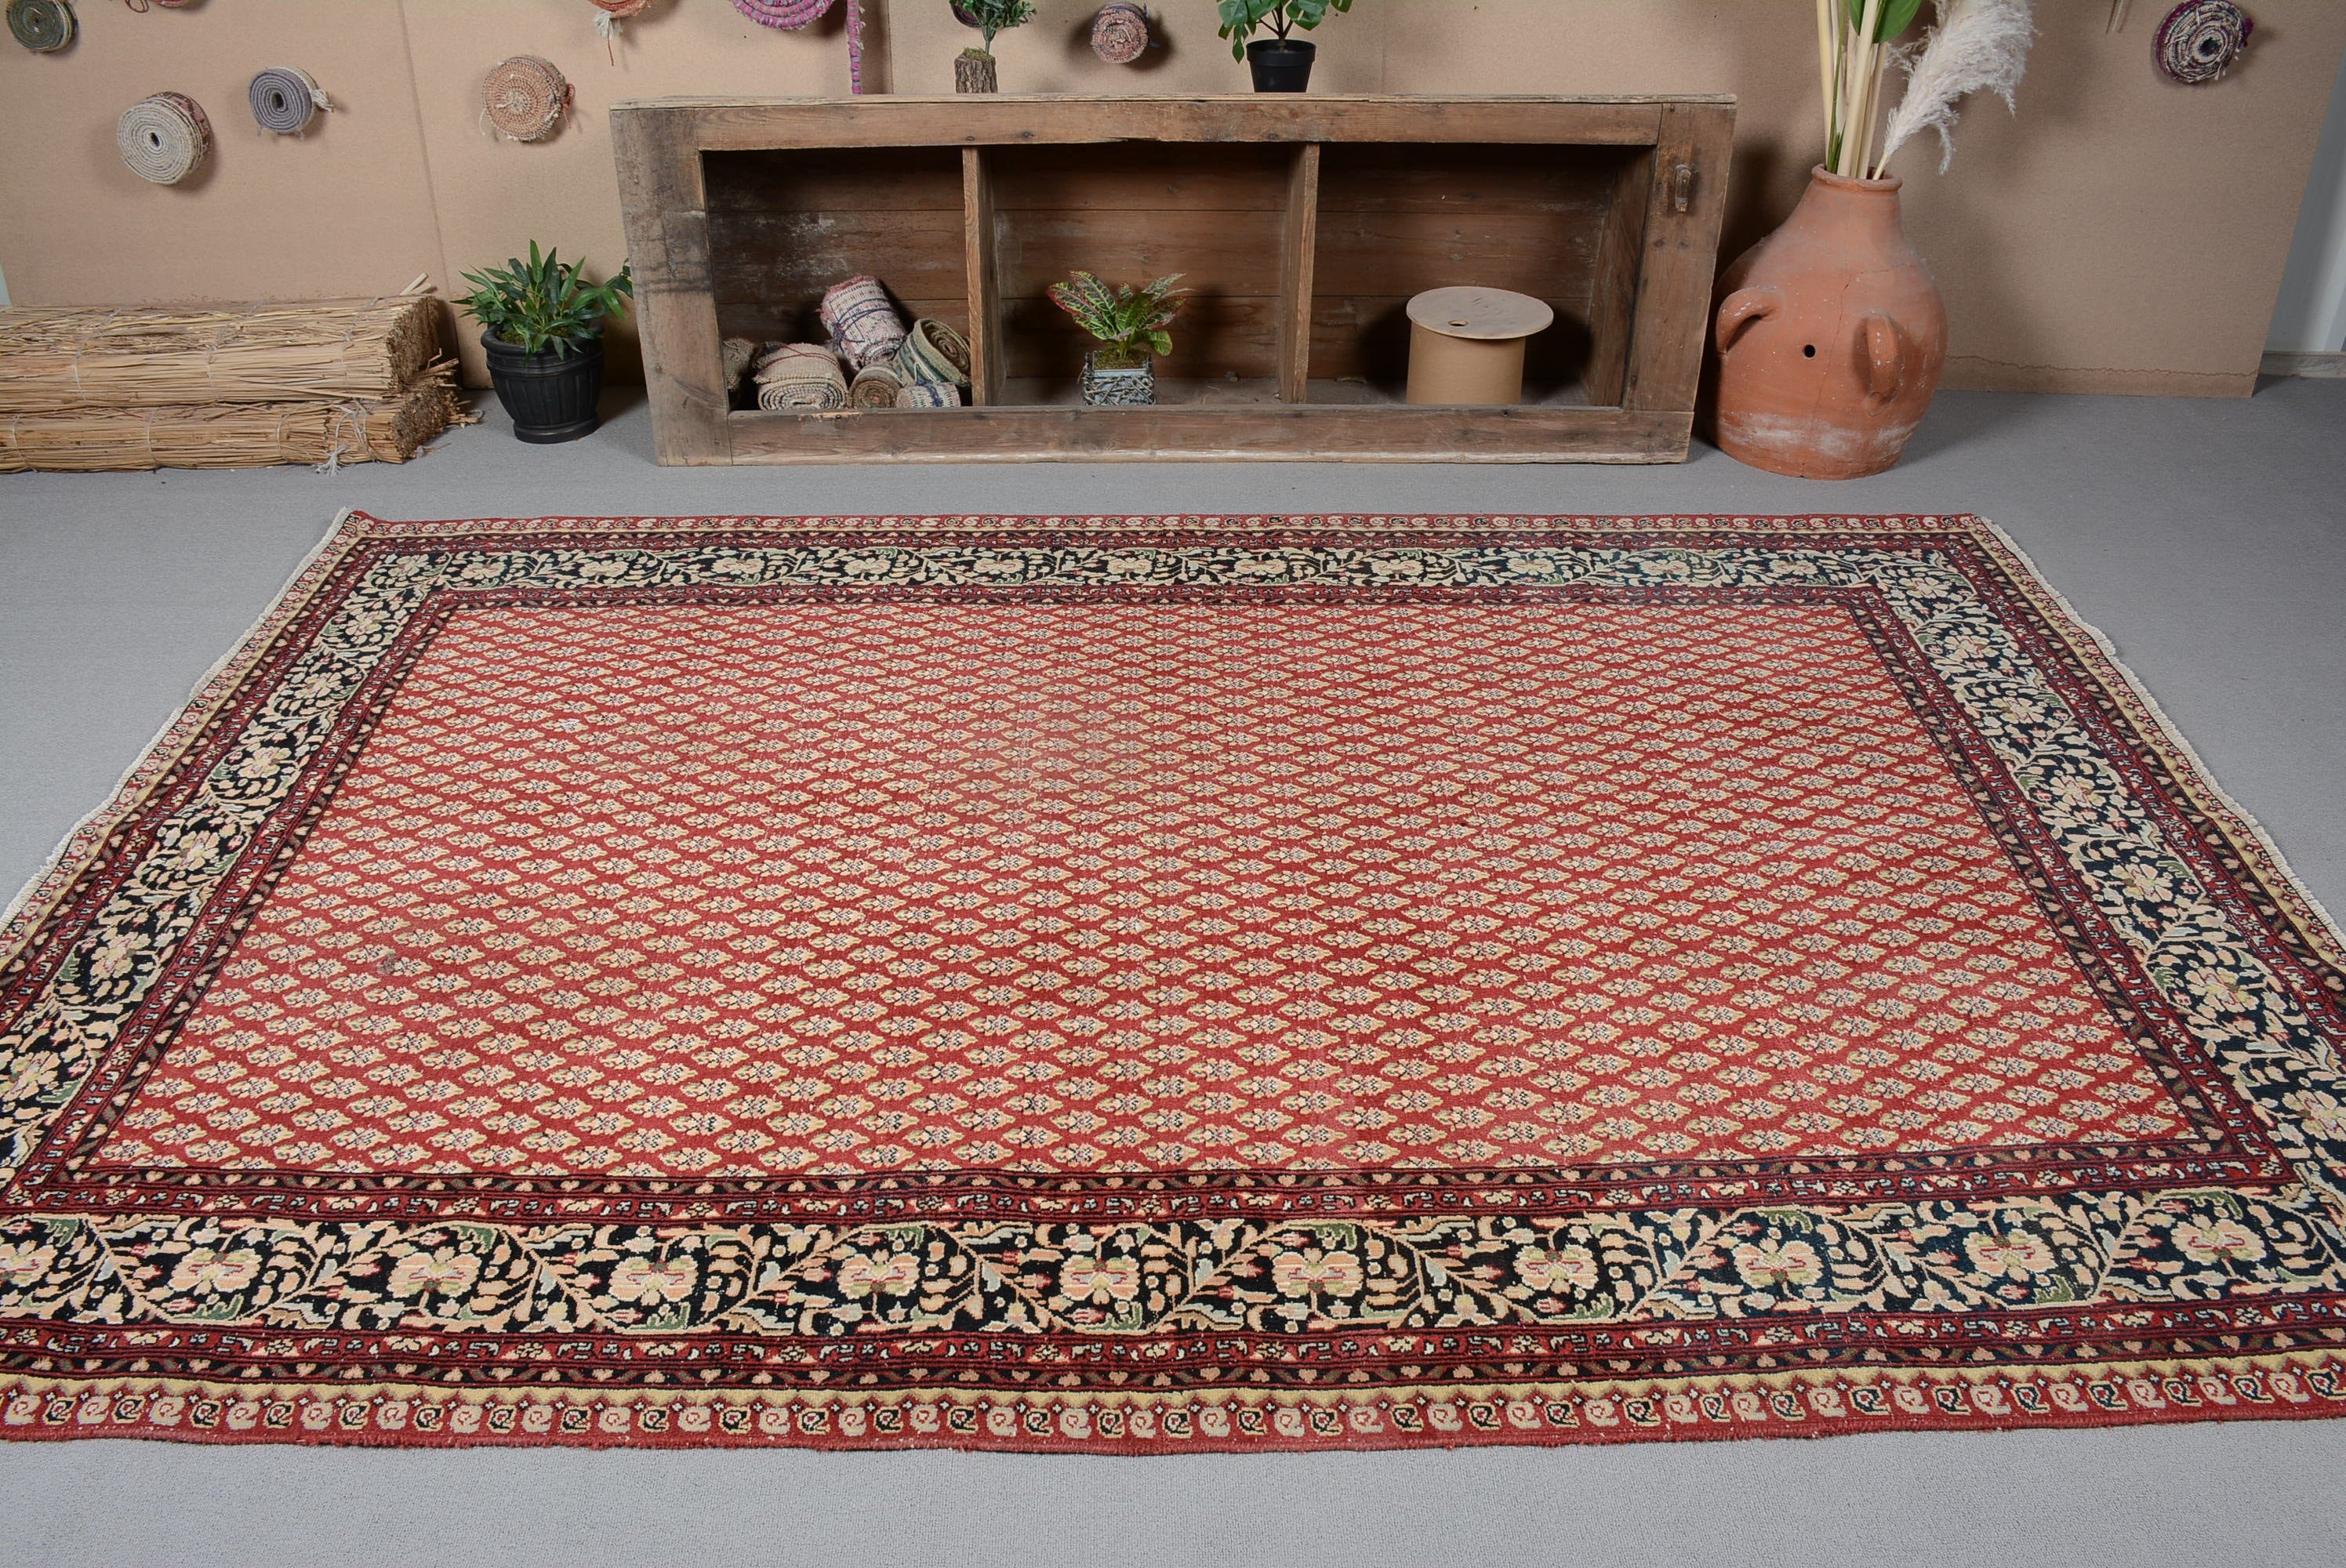 Turkish Rugs, 6x9 ft Large Rugs, Salon Rugs, Bedroom Rug, Vintage Rug, Home Decor Rugs, Red Home Decor Rug, Oushak Rug, Rugs for Bedroom